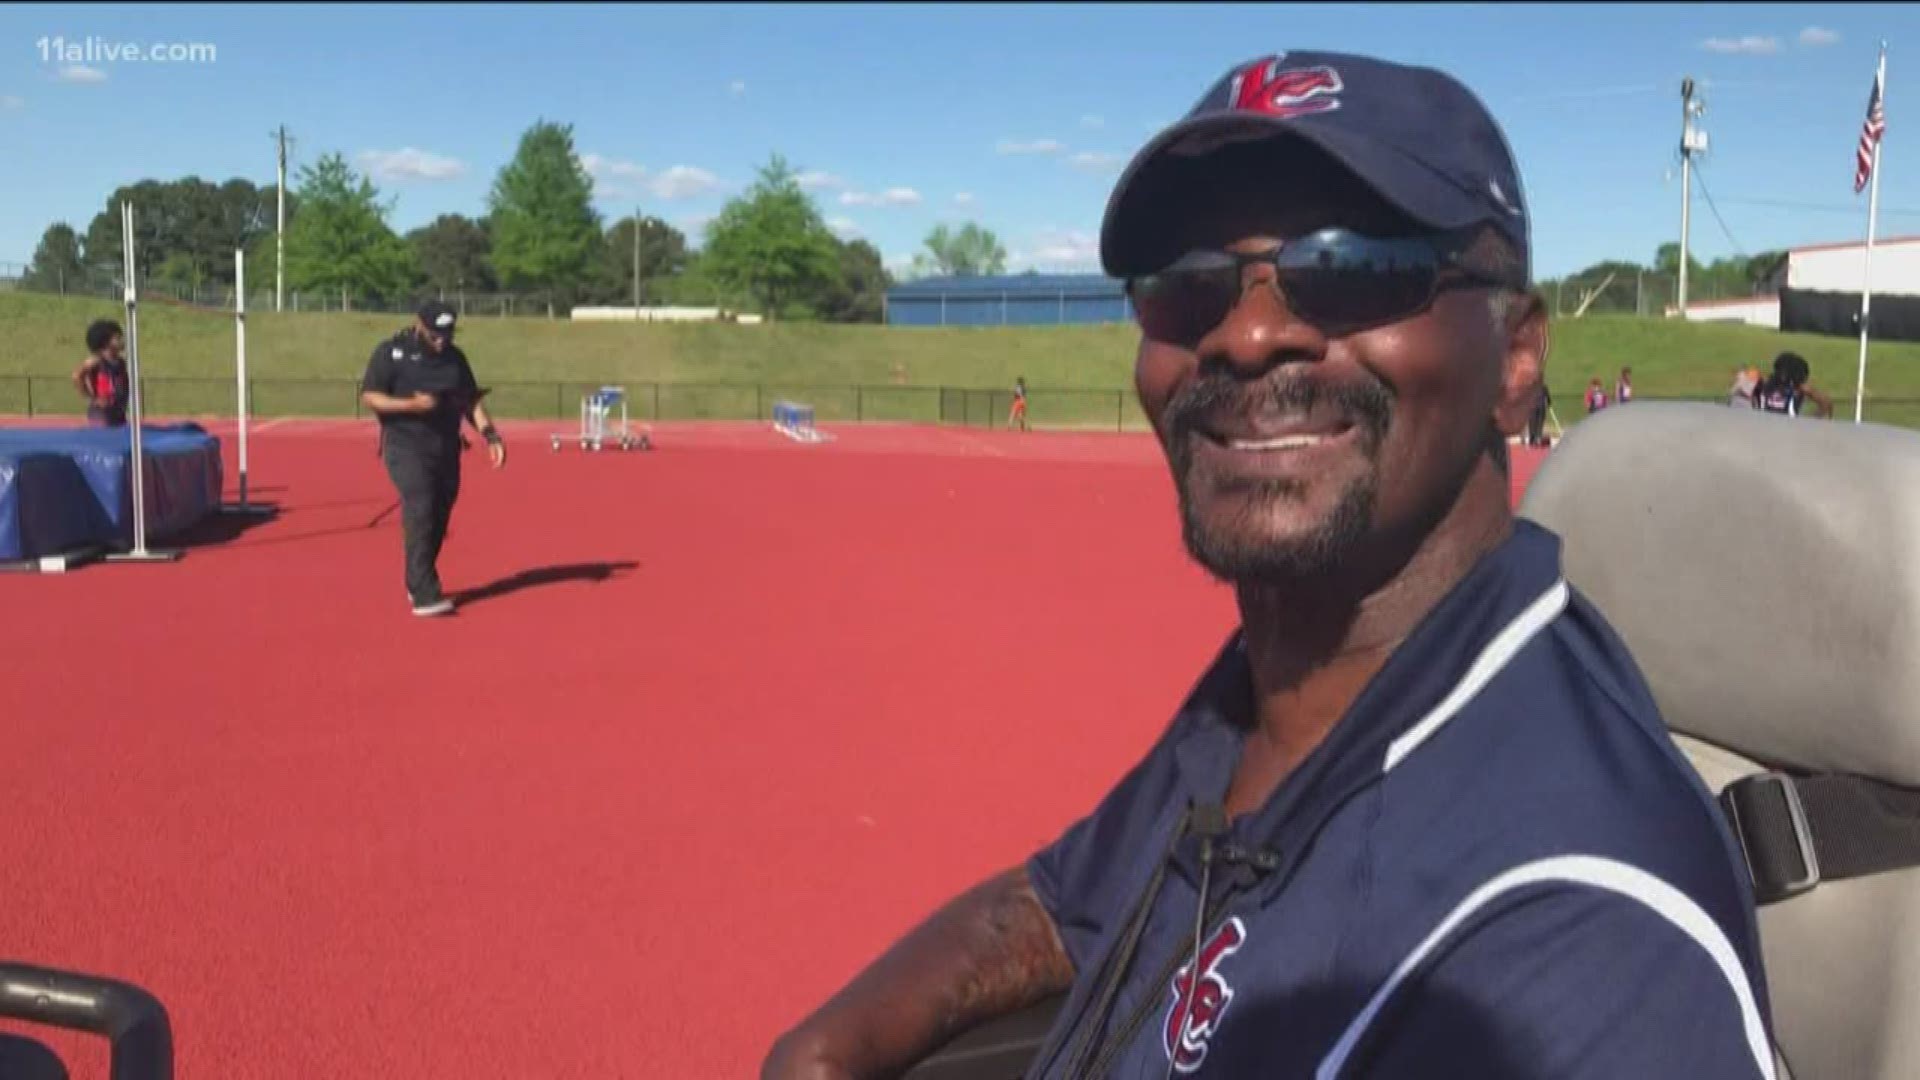 He was told he would never walk again after a car accident injured his brain and spine. But, 10 years later, with a lot of practice, love and a little help, he walked the 200 meter race.